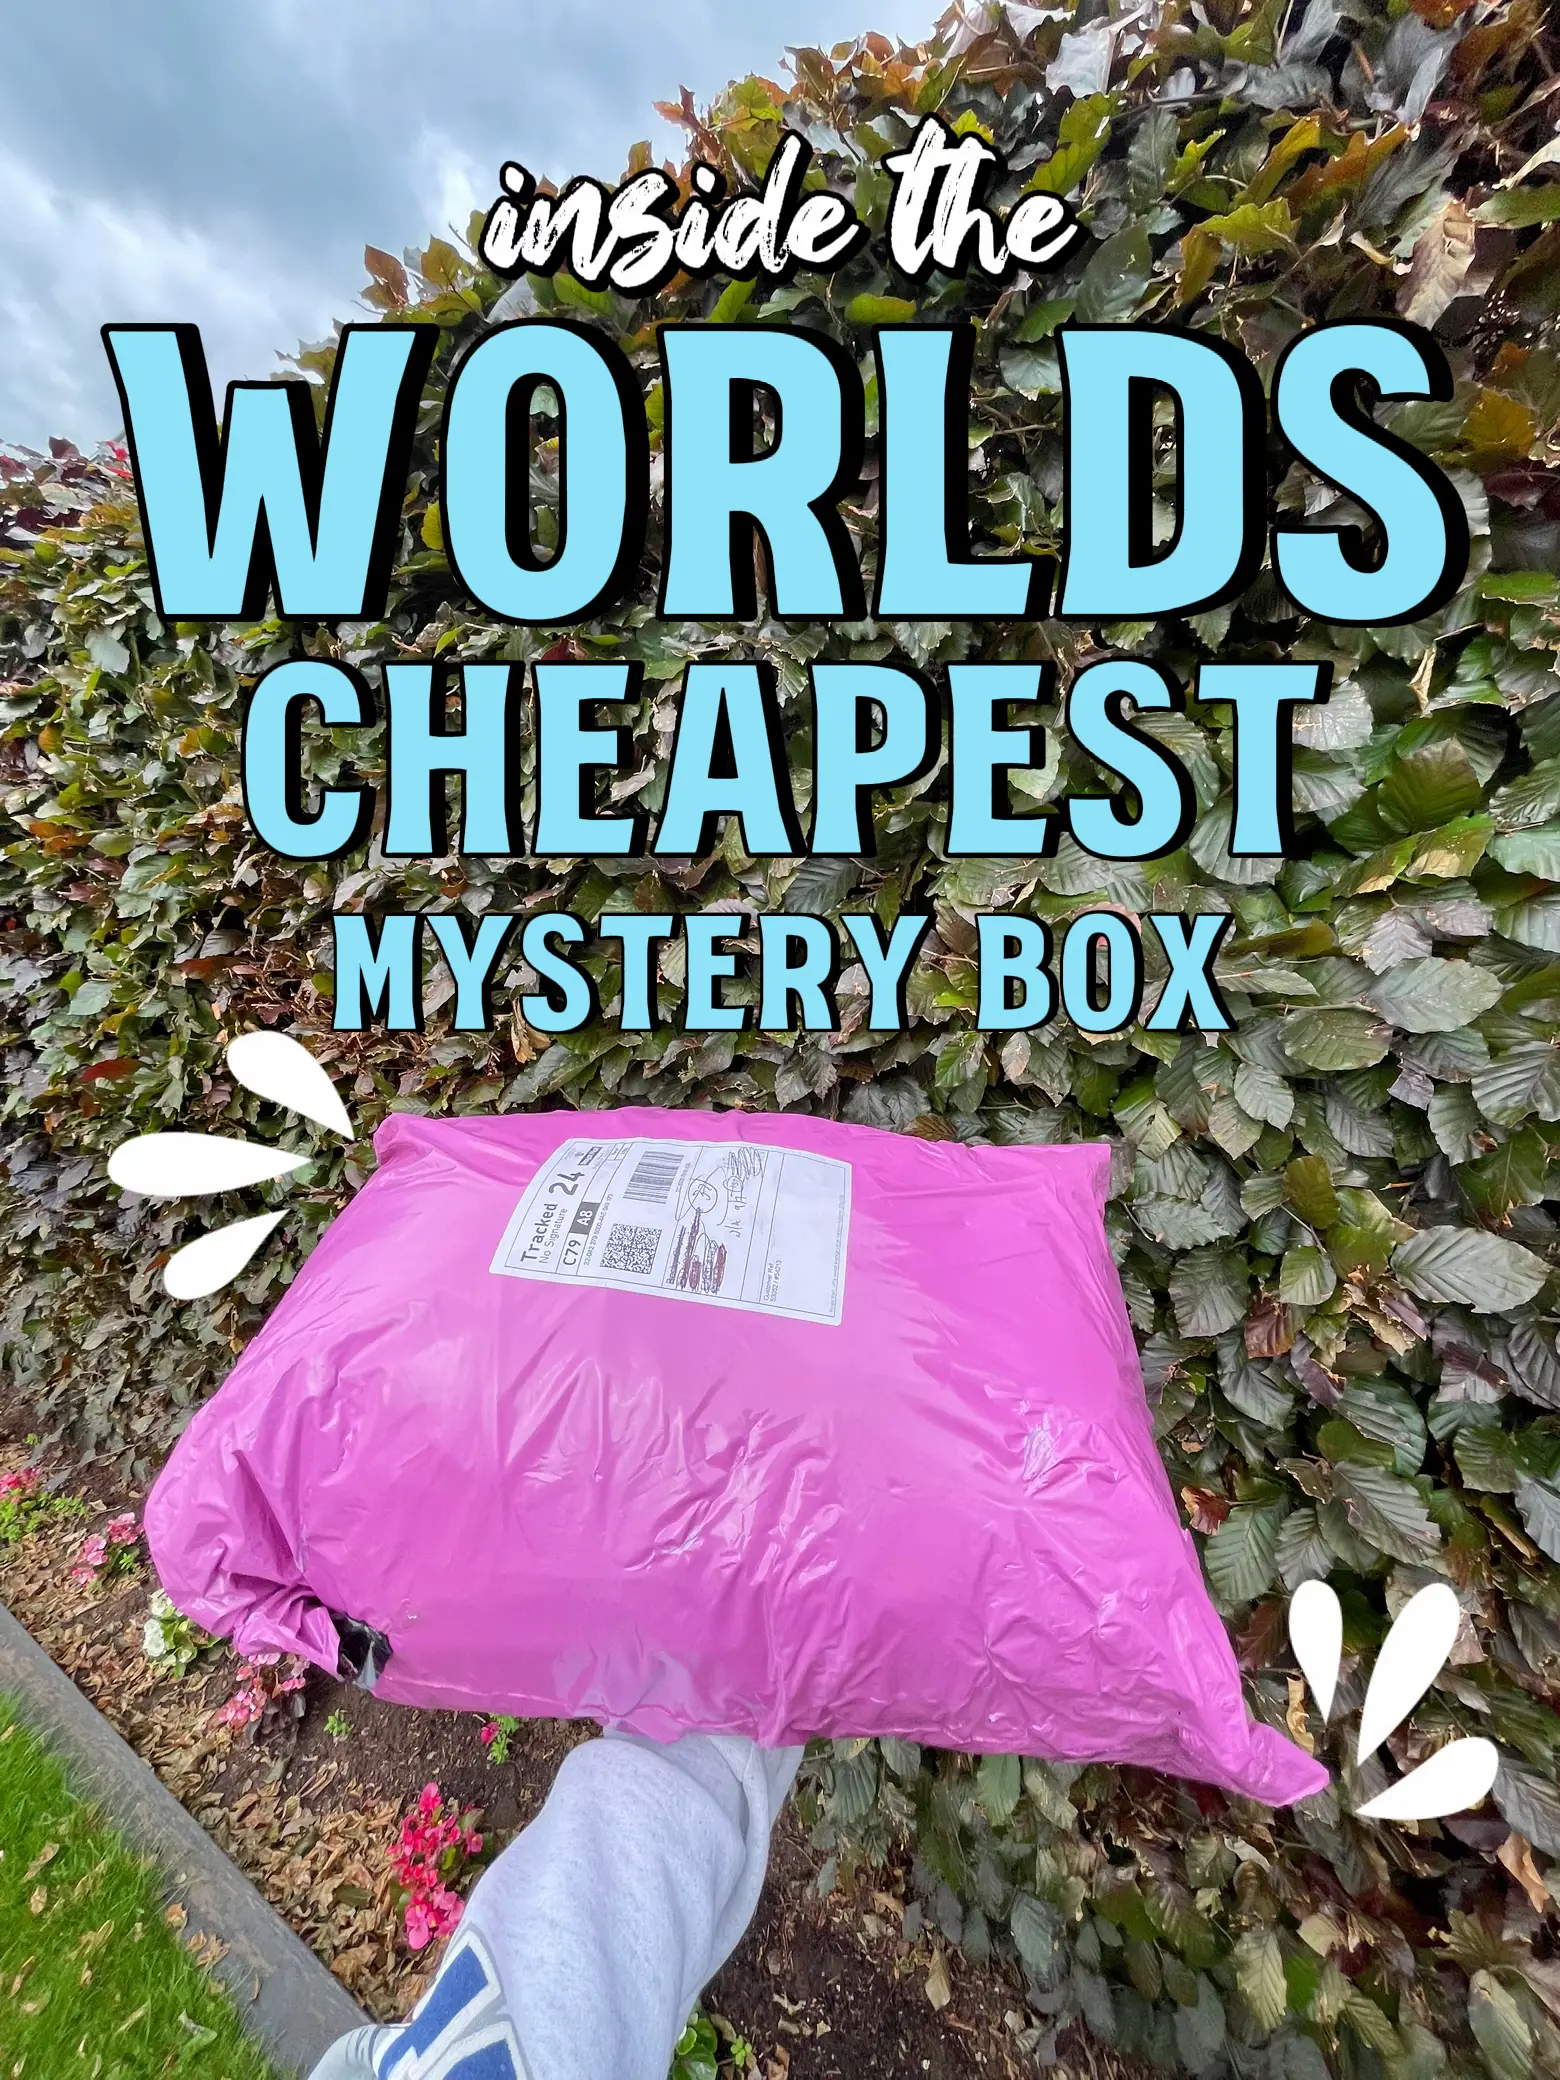 Open this mystery  package with me! # #finds